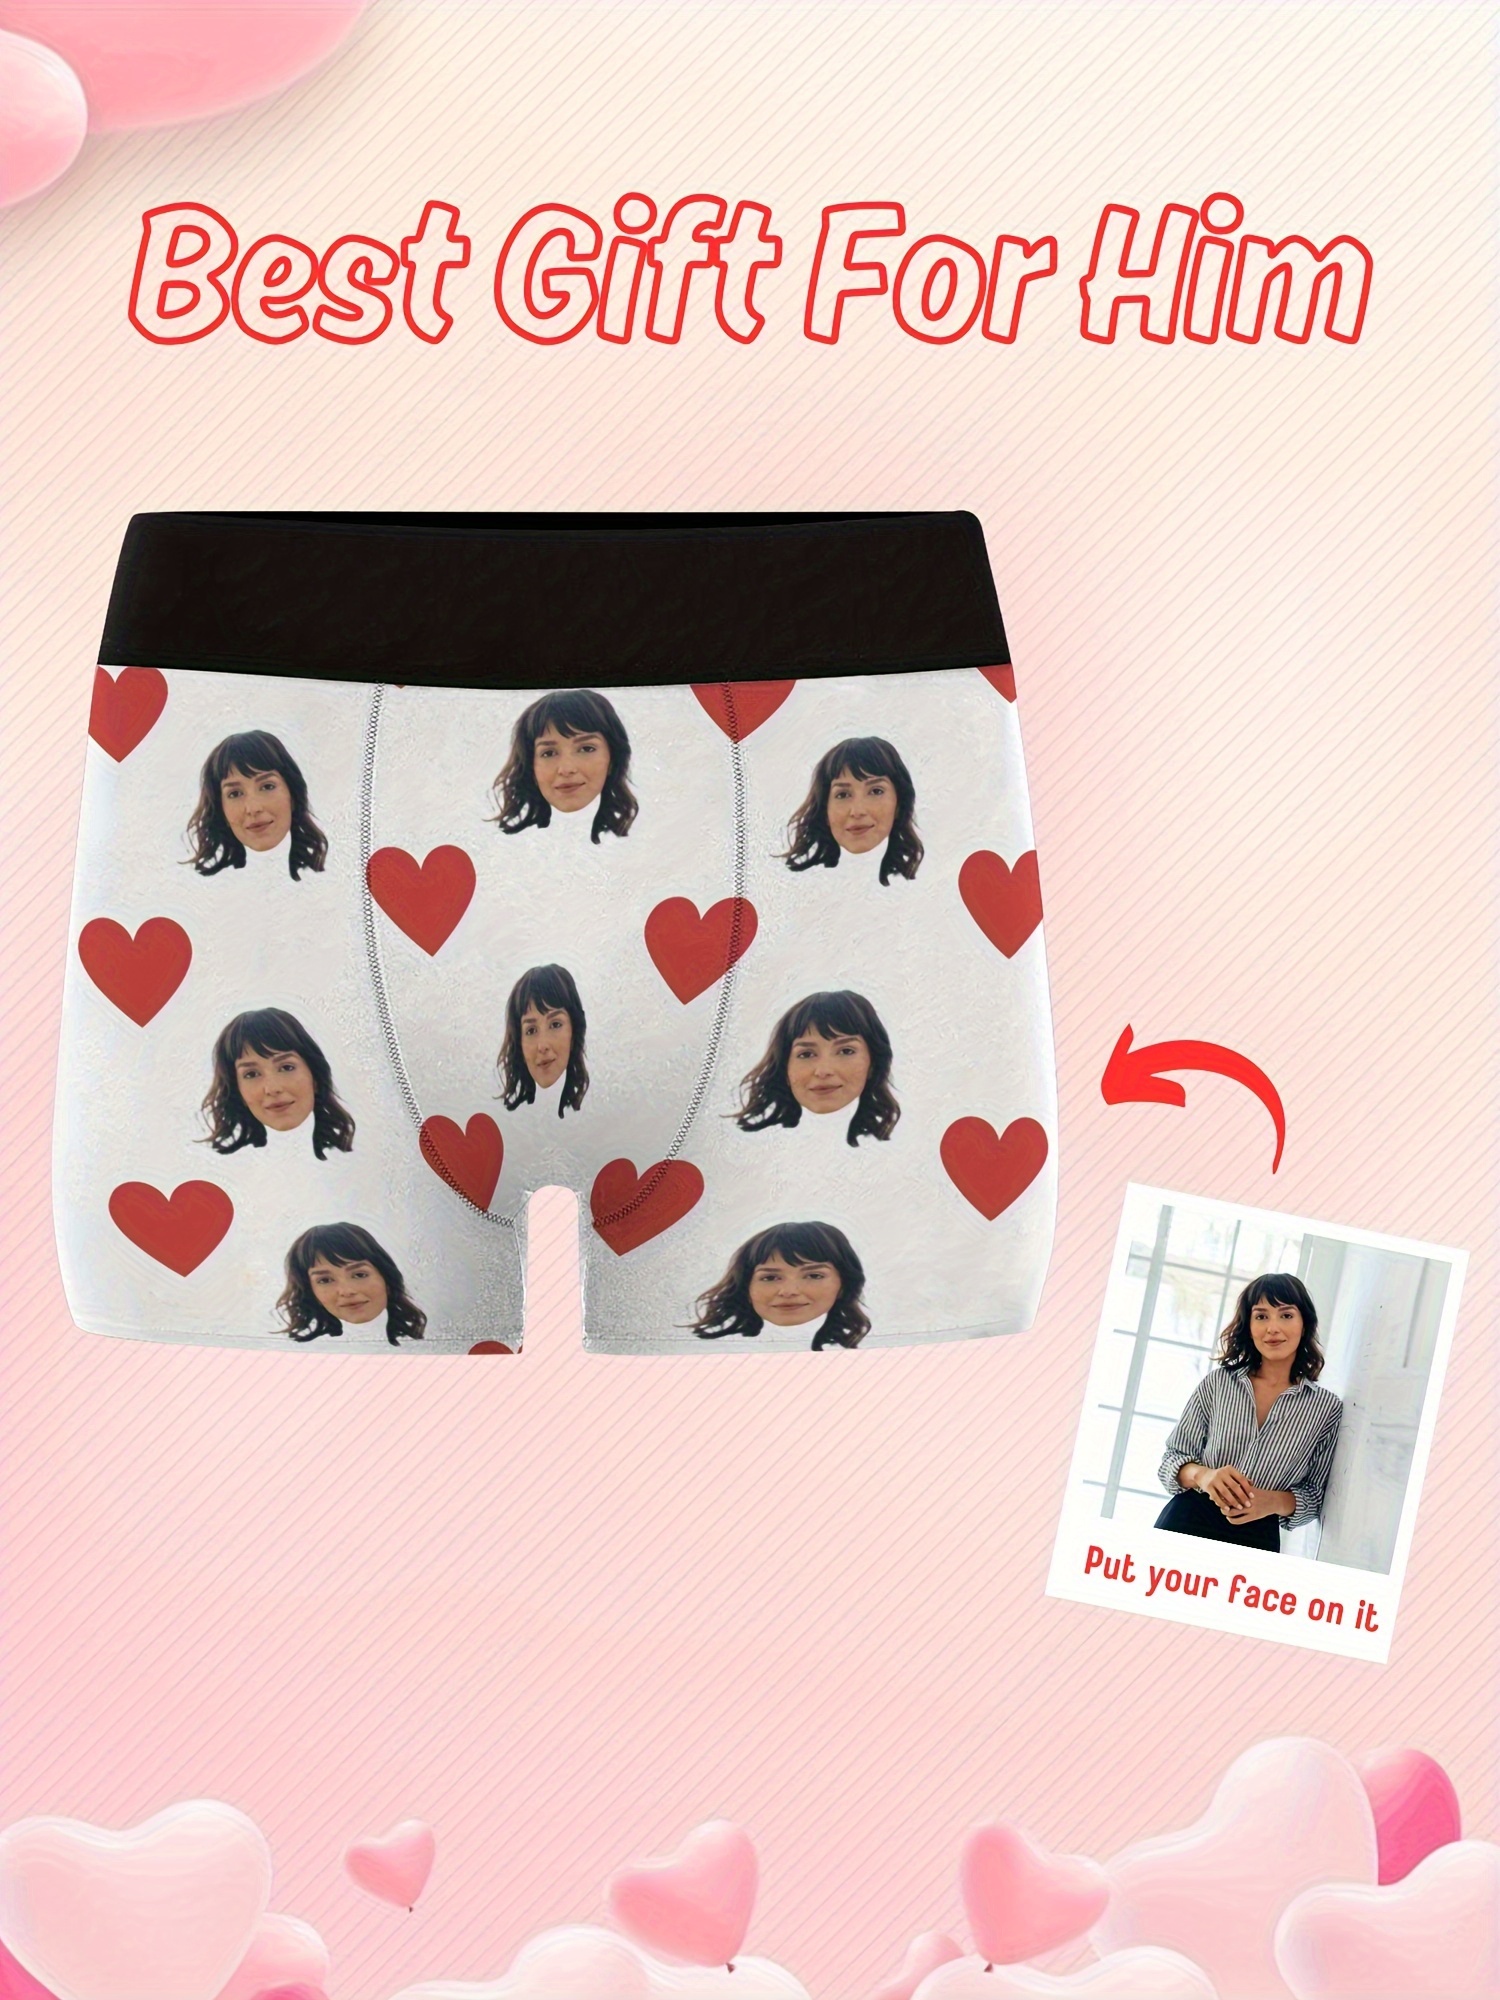 Personalised Face Custom Valentine's Boxer Shorts/Trunks – A.C